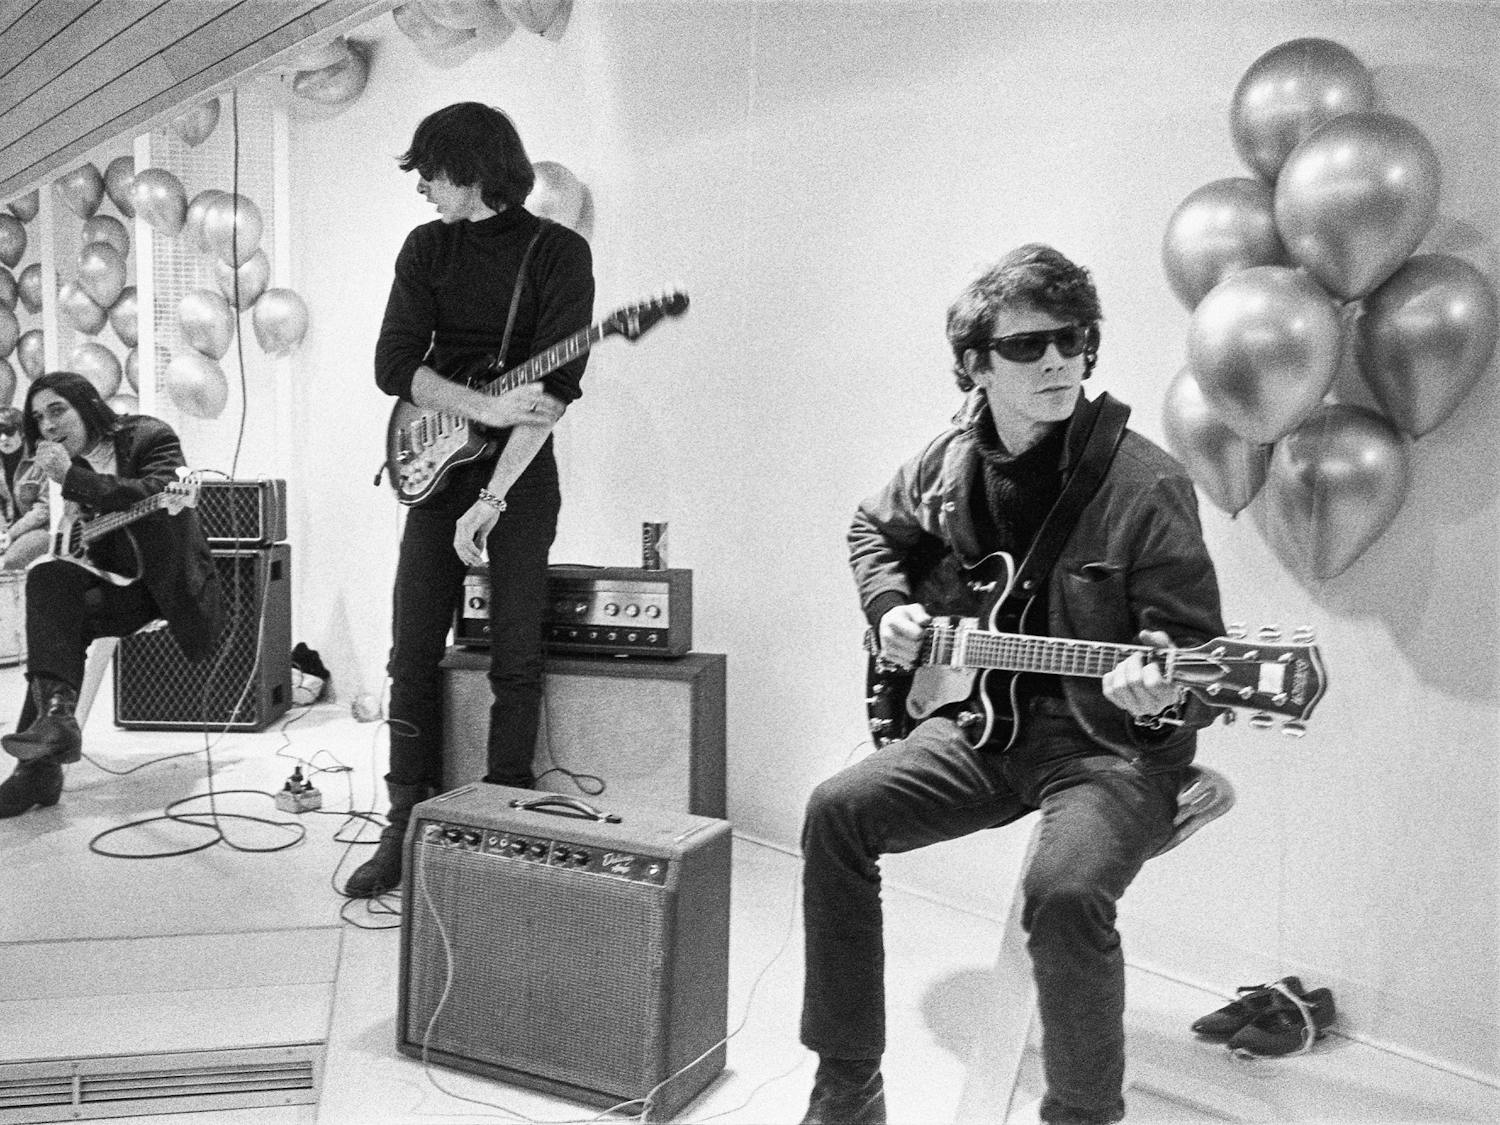 From left, Maureen "Moe" Tucker, John Cale, Sterling Morrison and Lou Reed from archival photography from "The Velvet Underground," streaming now on Apple TV+.